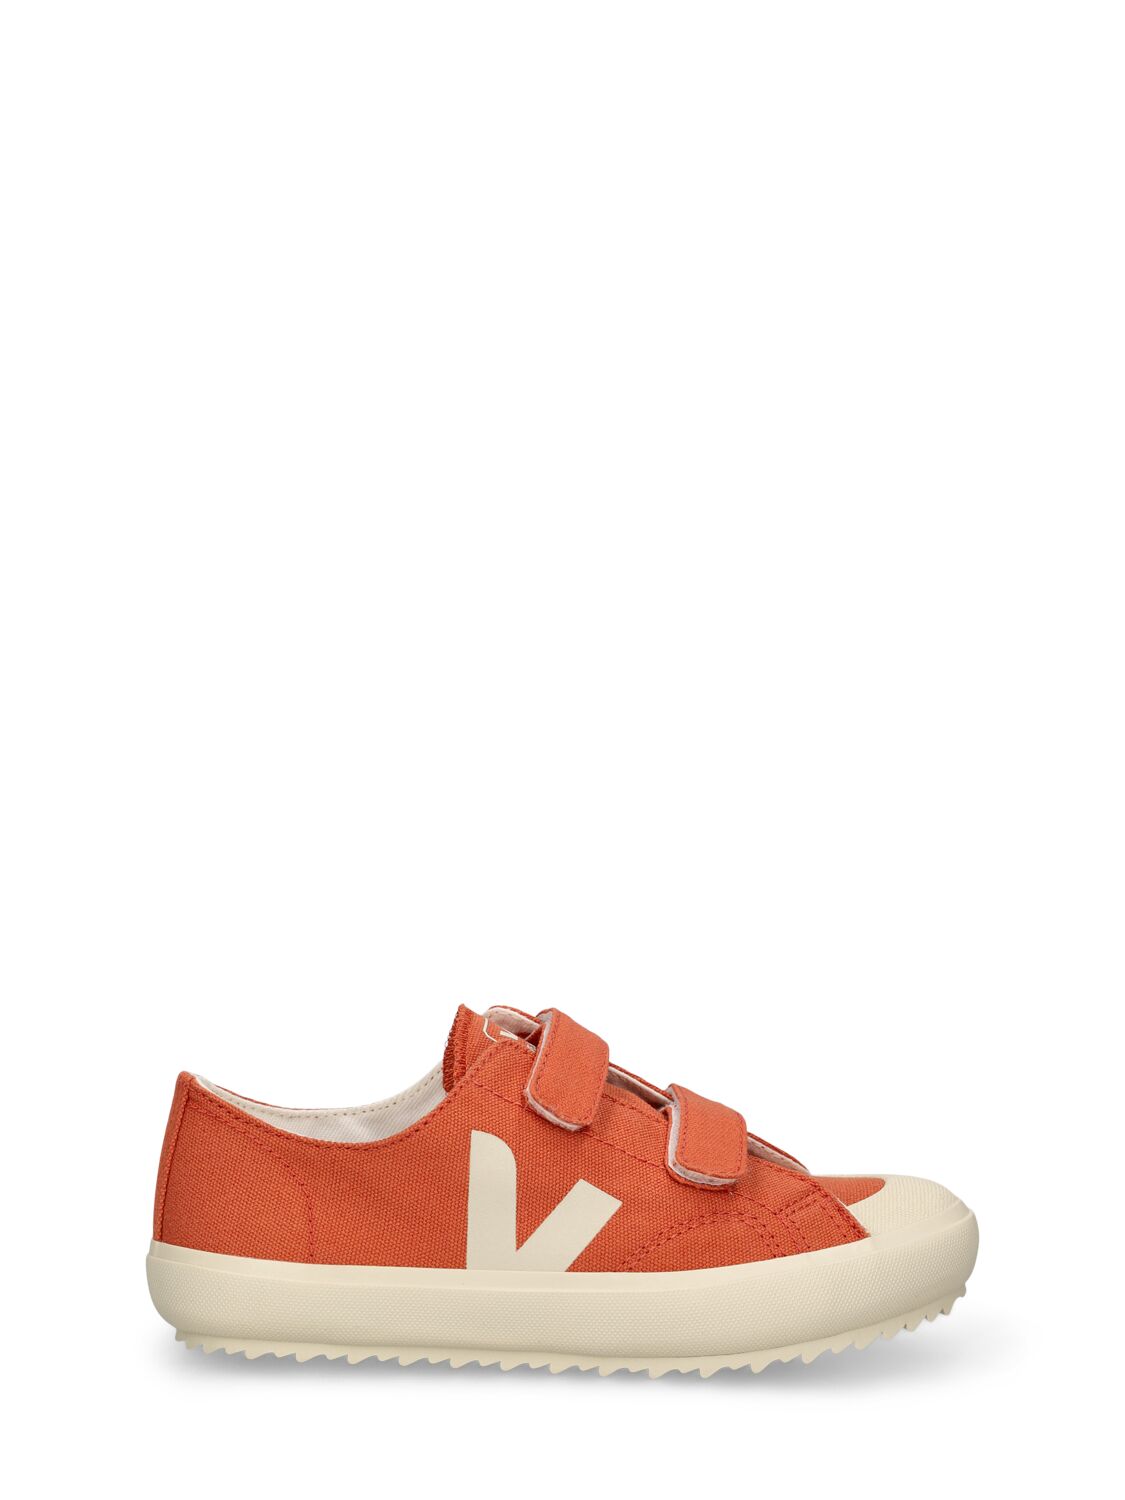 Veja Kids' Ollie Cotton Canvas Strap Sneakers In Brown